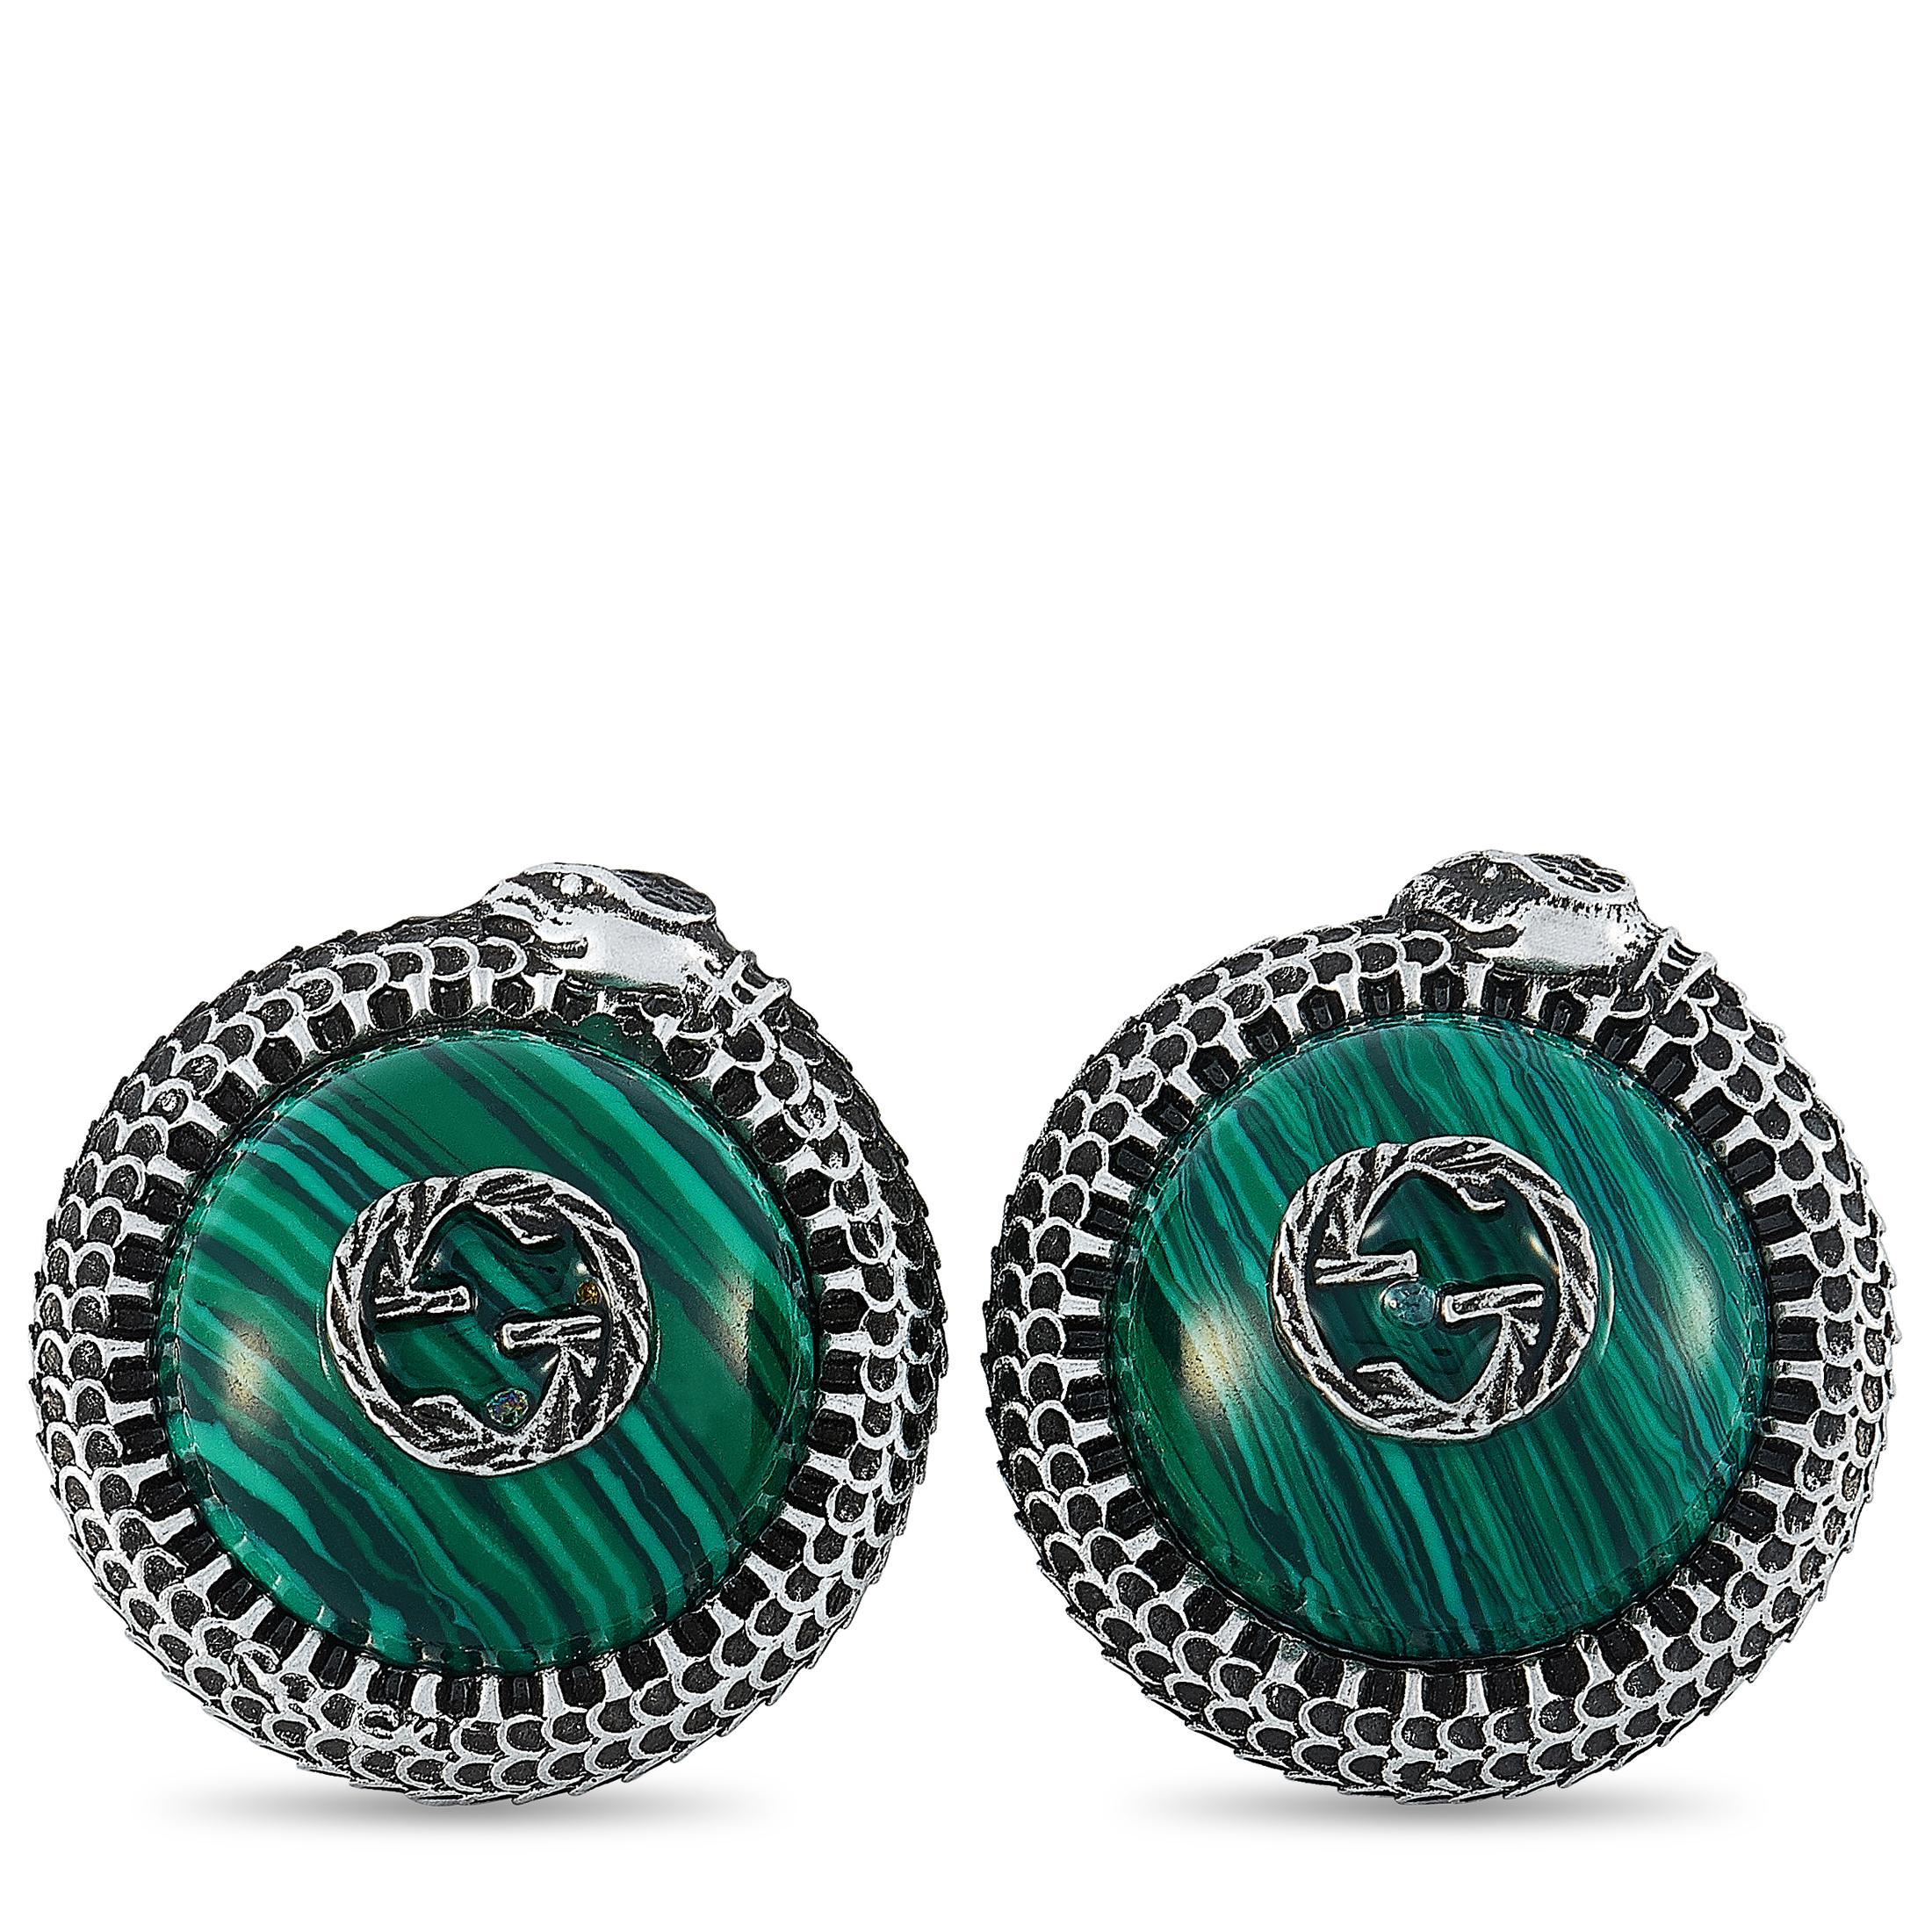 The Gucci “Garden” cufflinks are made of sterling silver and embellished with malachite stones. The cufflinks measure 0.62” in length and 0.62” in width and each of the two weighs 7.6 grams.

The pair is offered in brand new condition and includes